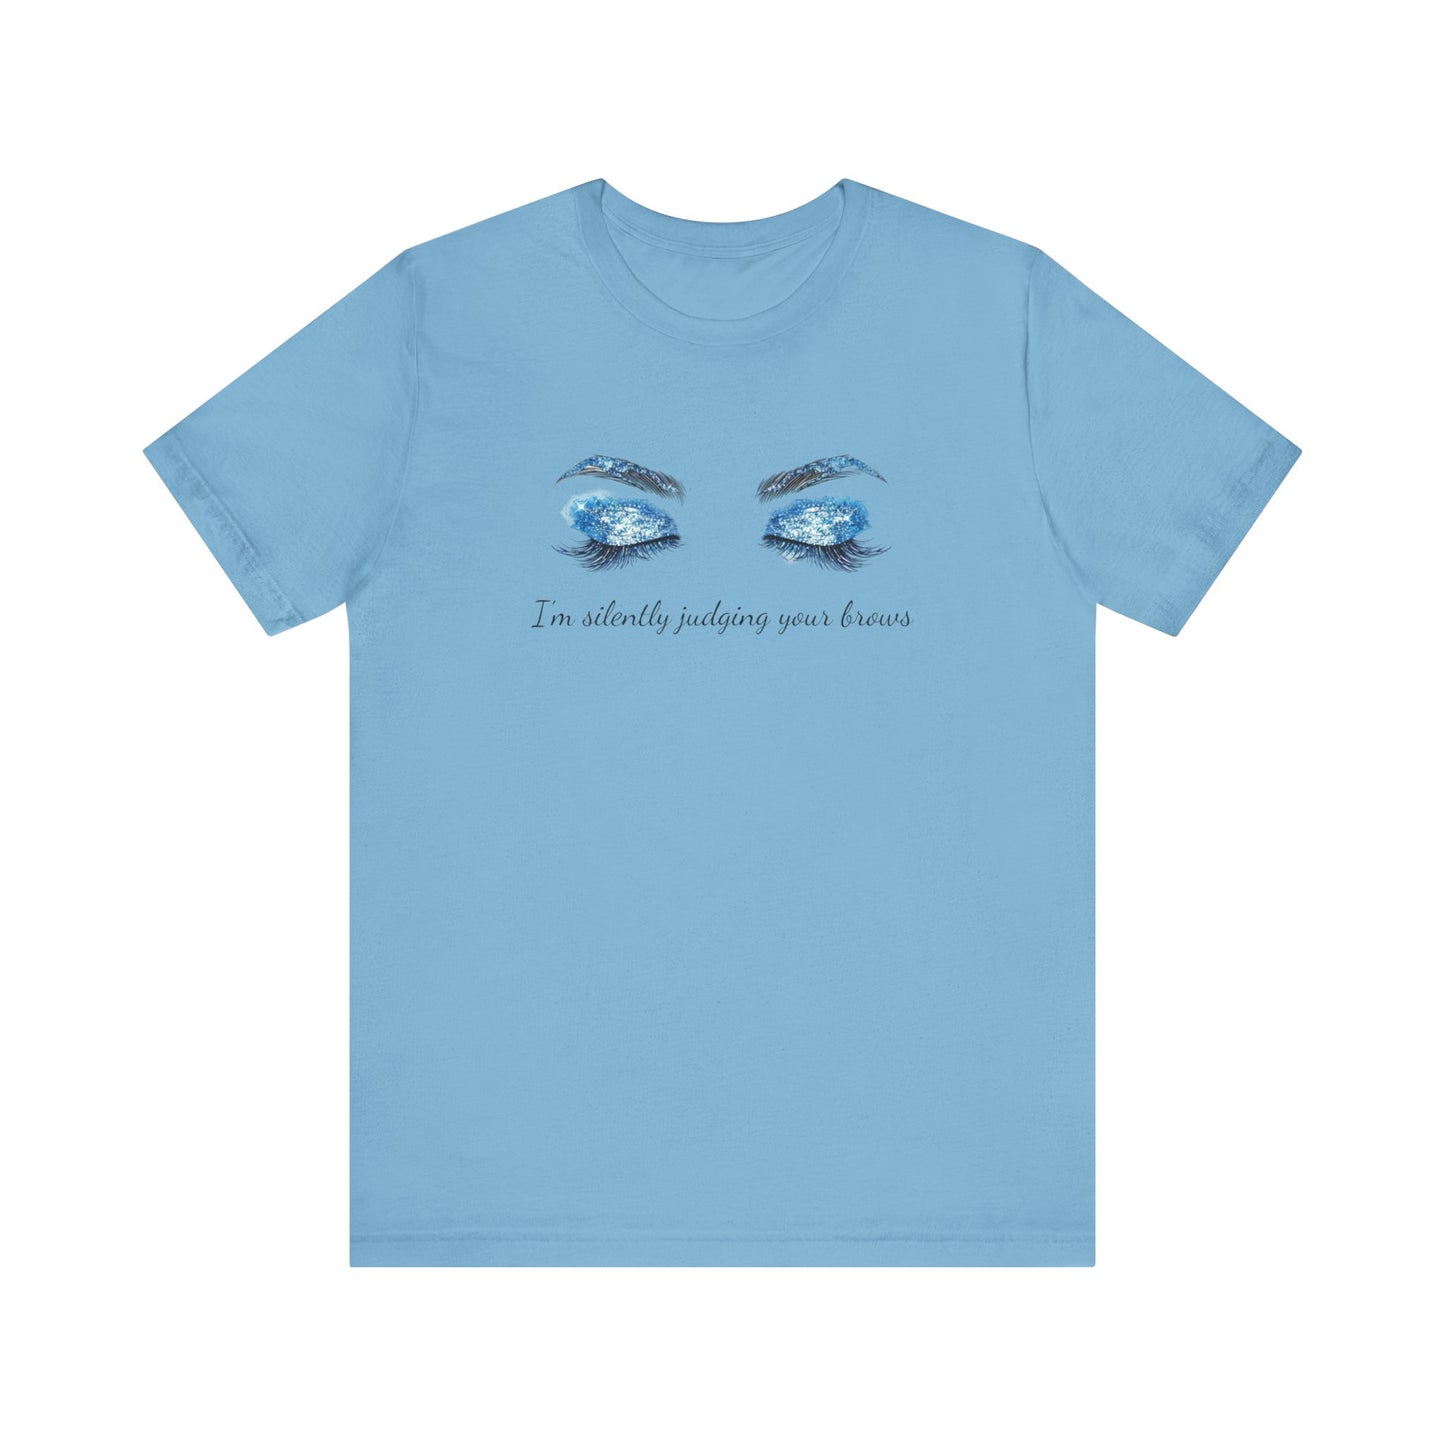 I'm silently judging your brows Unisex Tshirt